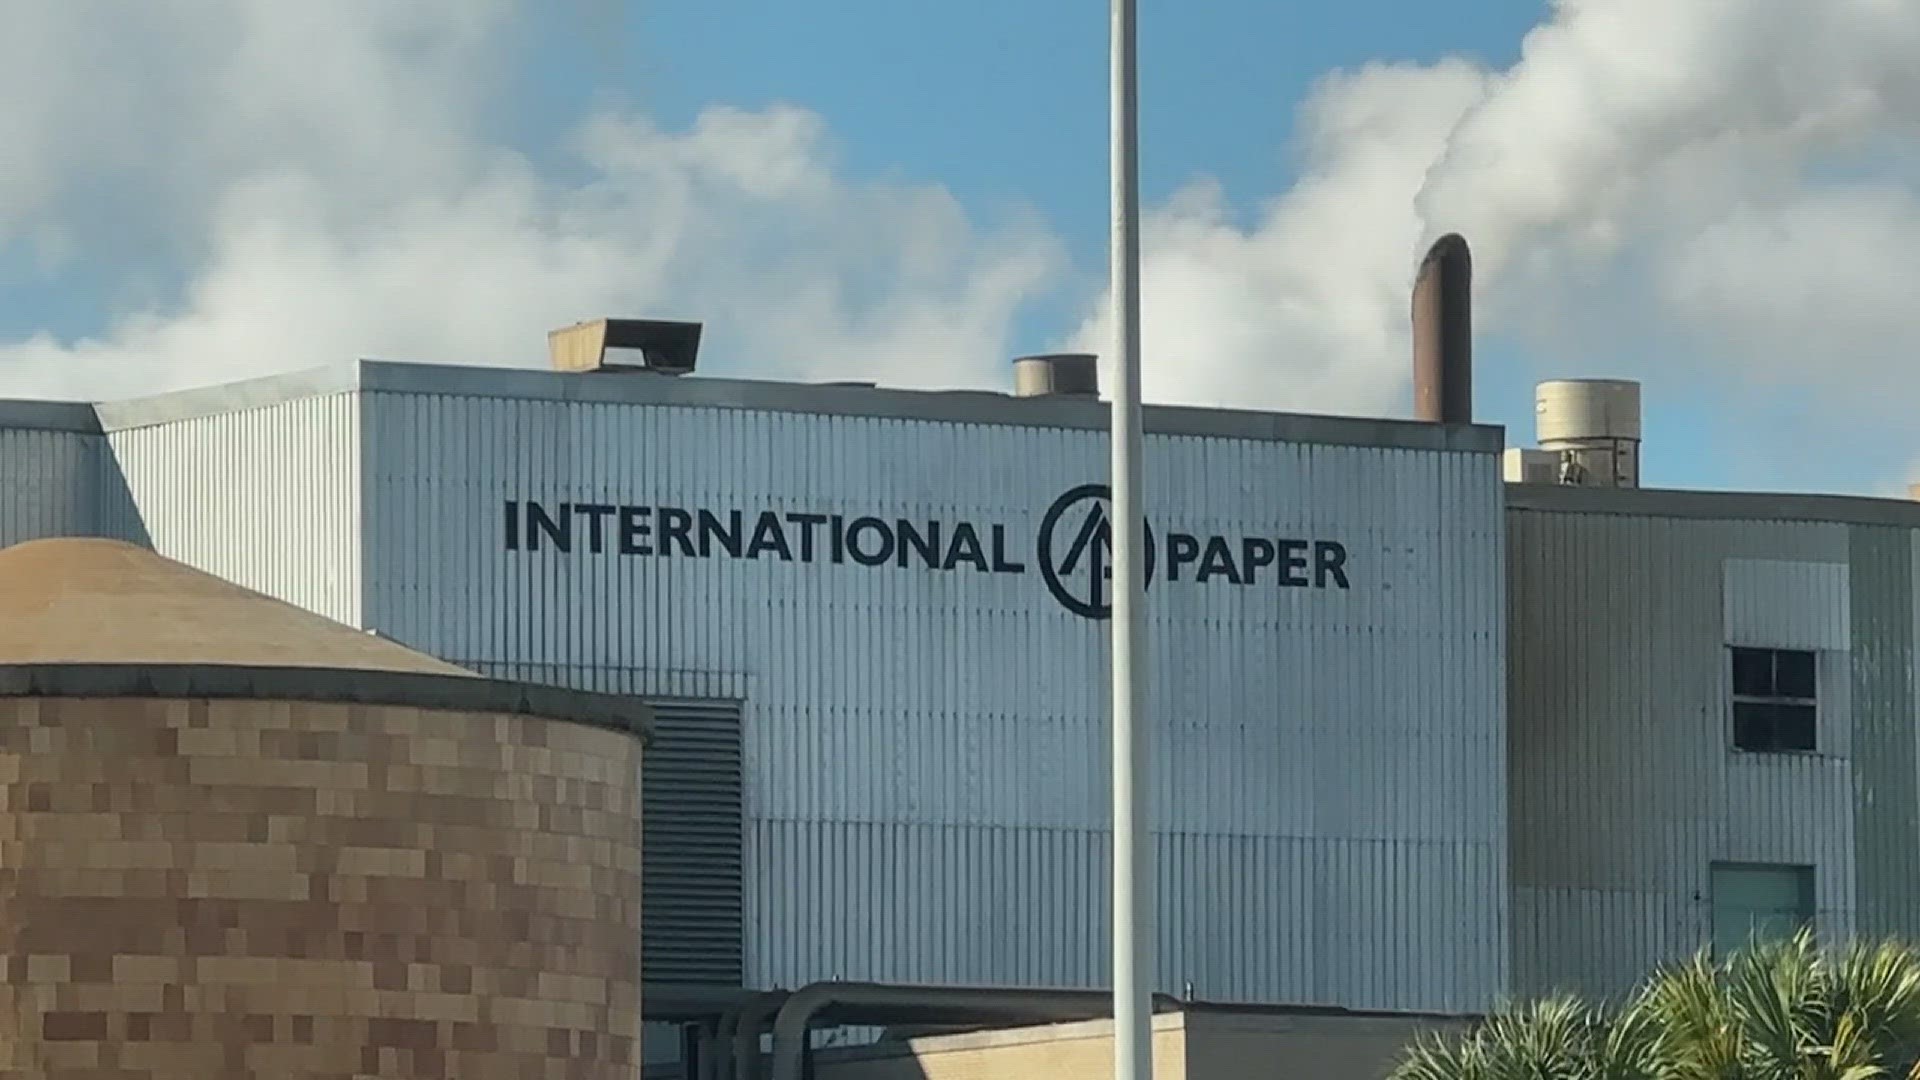 Three months after production at International Paper stopped, the building is now an empty shell.